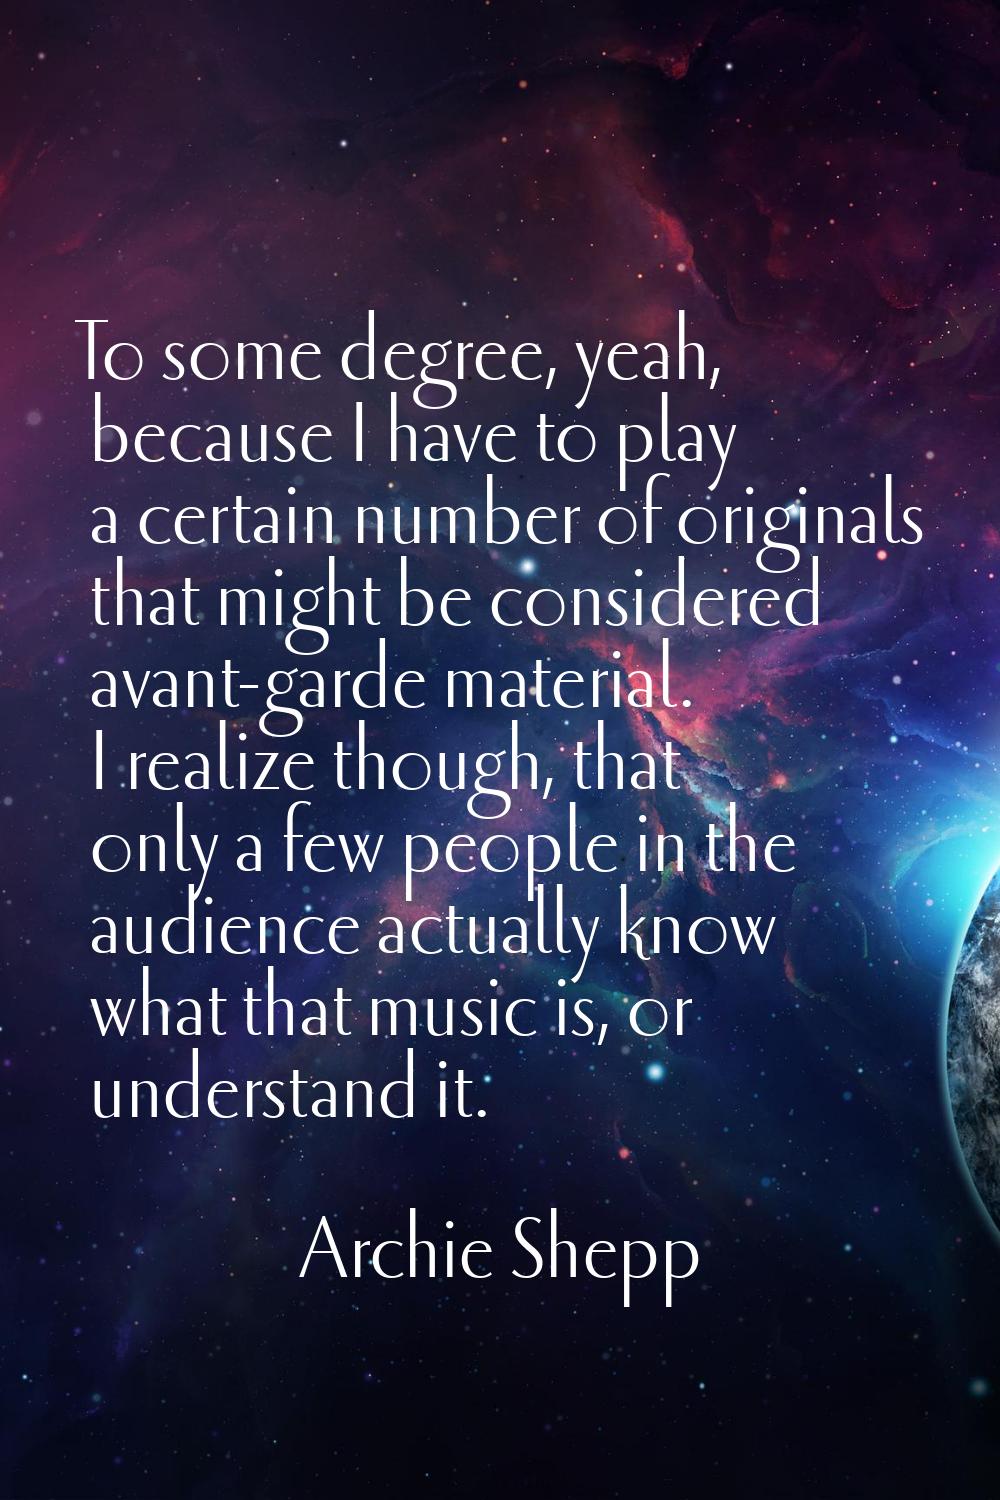 To some degree, yeah, because I have to play a certain number of originals that might be considered